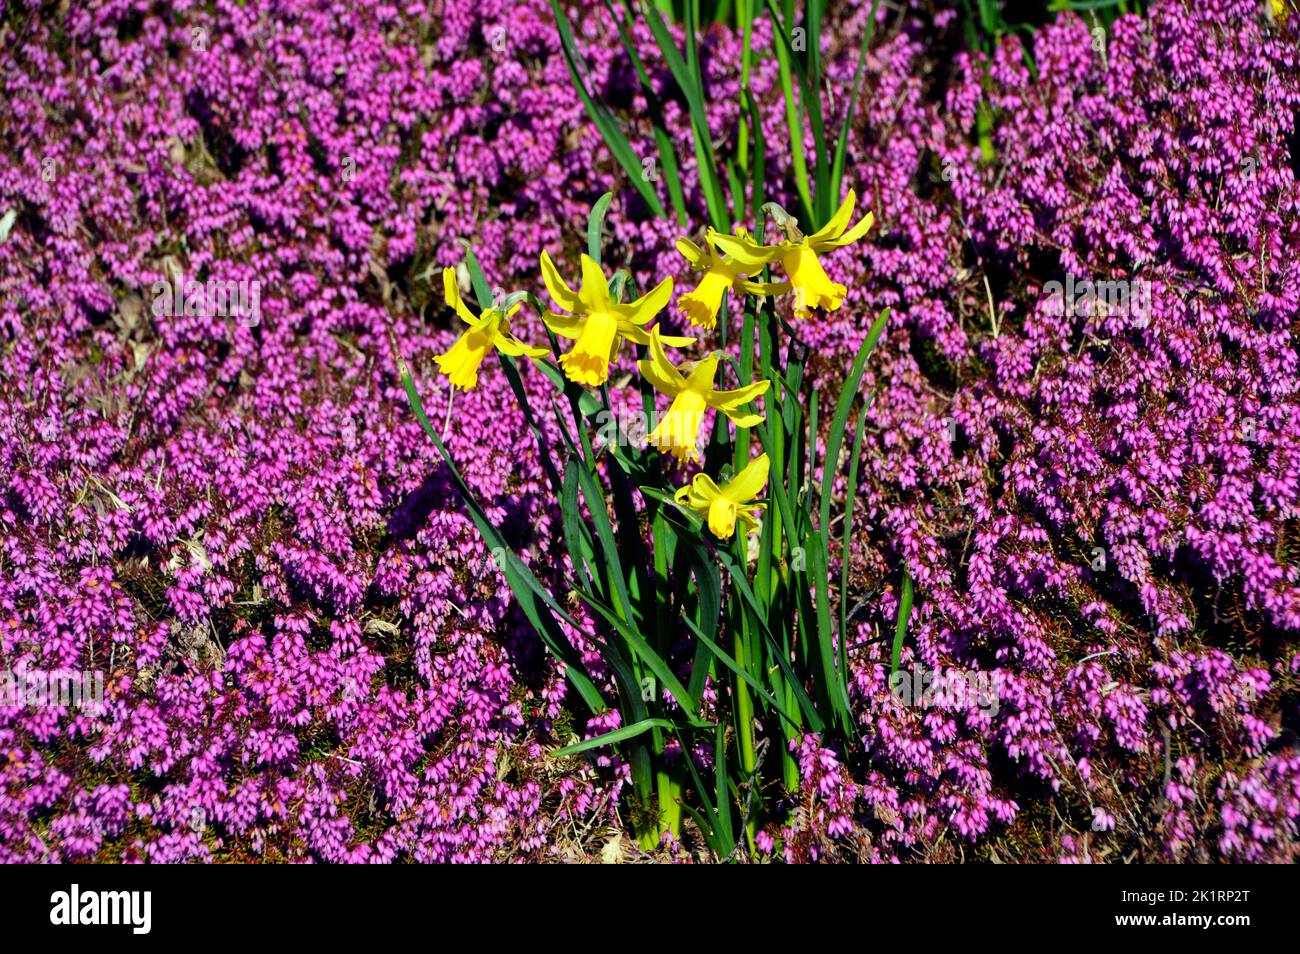 Purple Erica Carnea (Heather) & Bunch of Yellow Daffodils in a Border at RHS Harlow Carr, Harrogate, Yorkshire, England, UK. Stock Photo